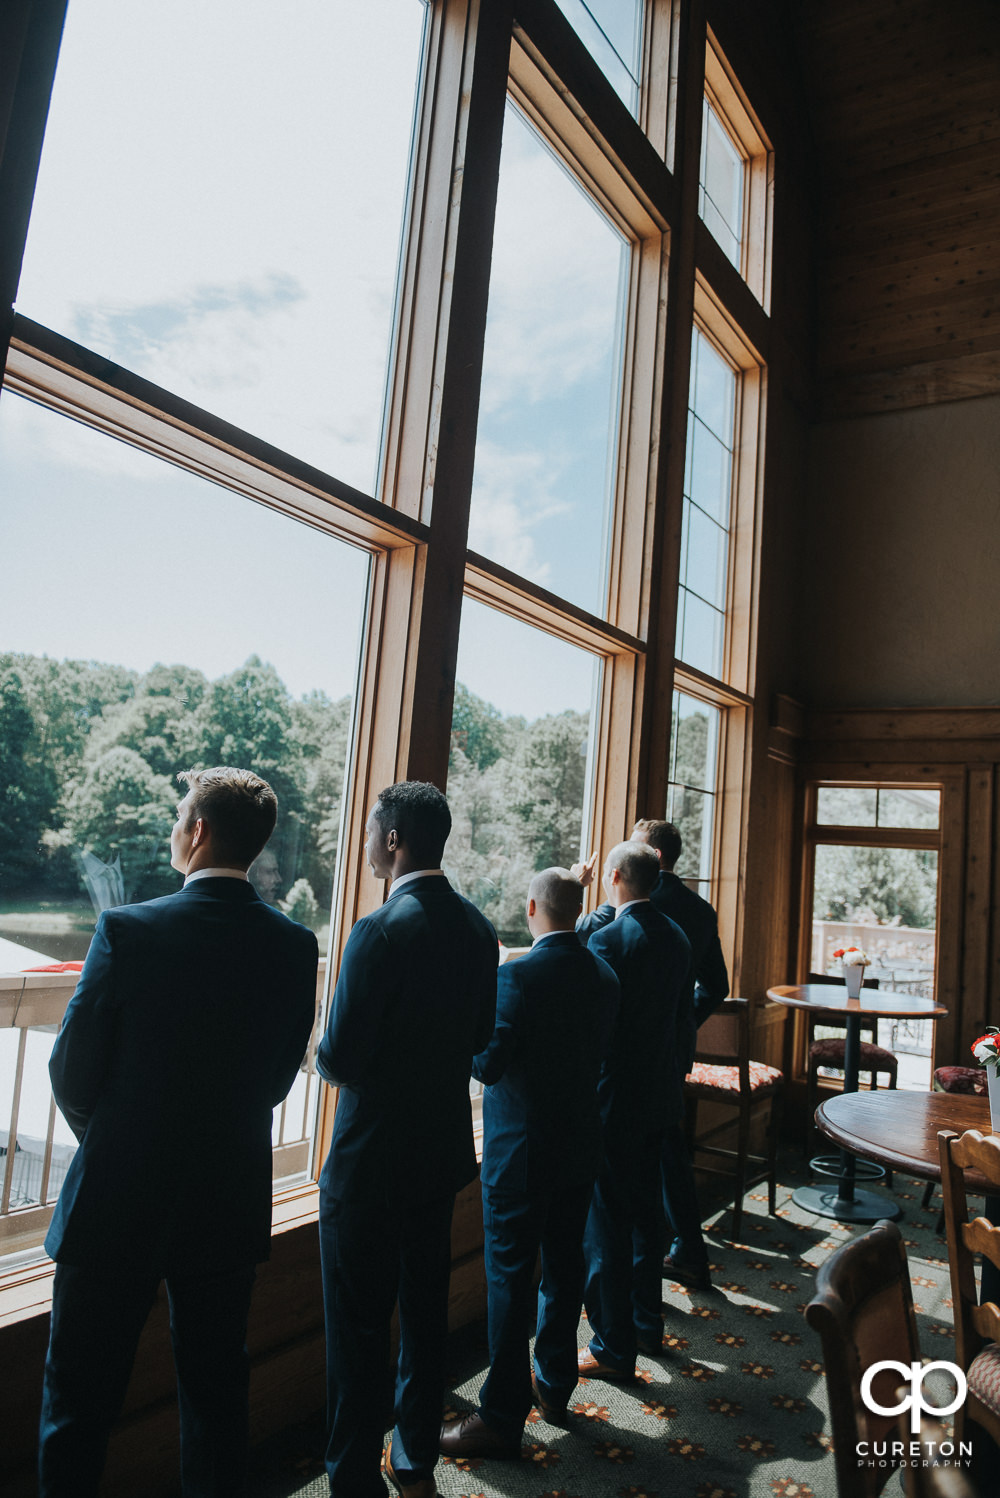 Groomsmen staring out of the window before the ceremony.